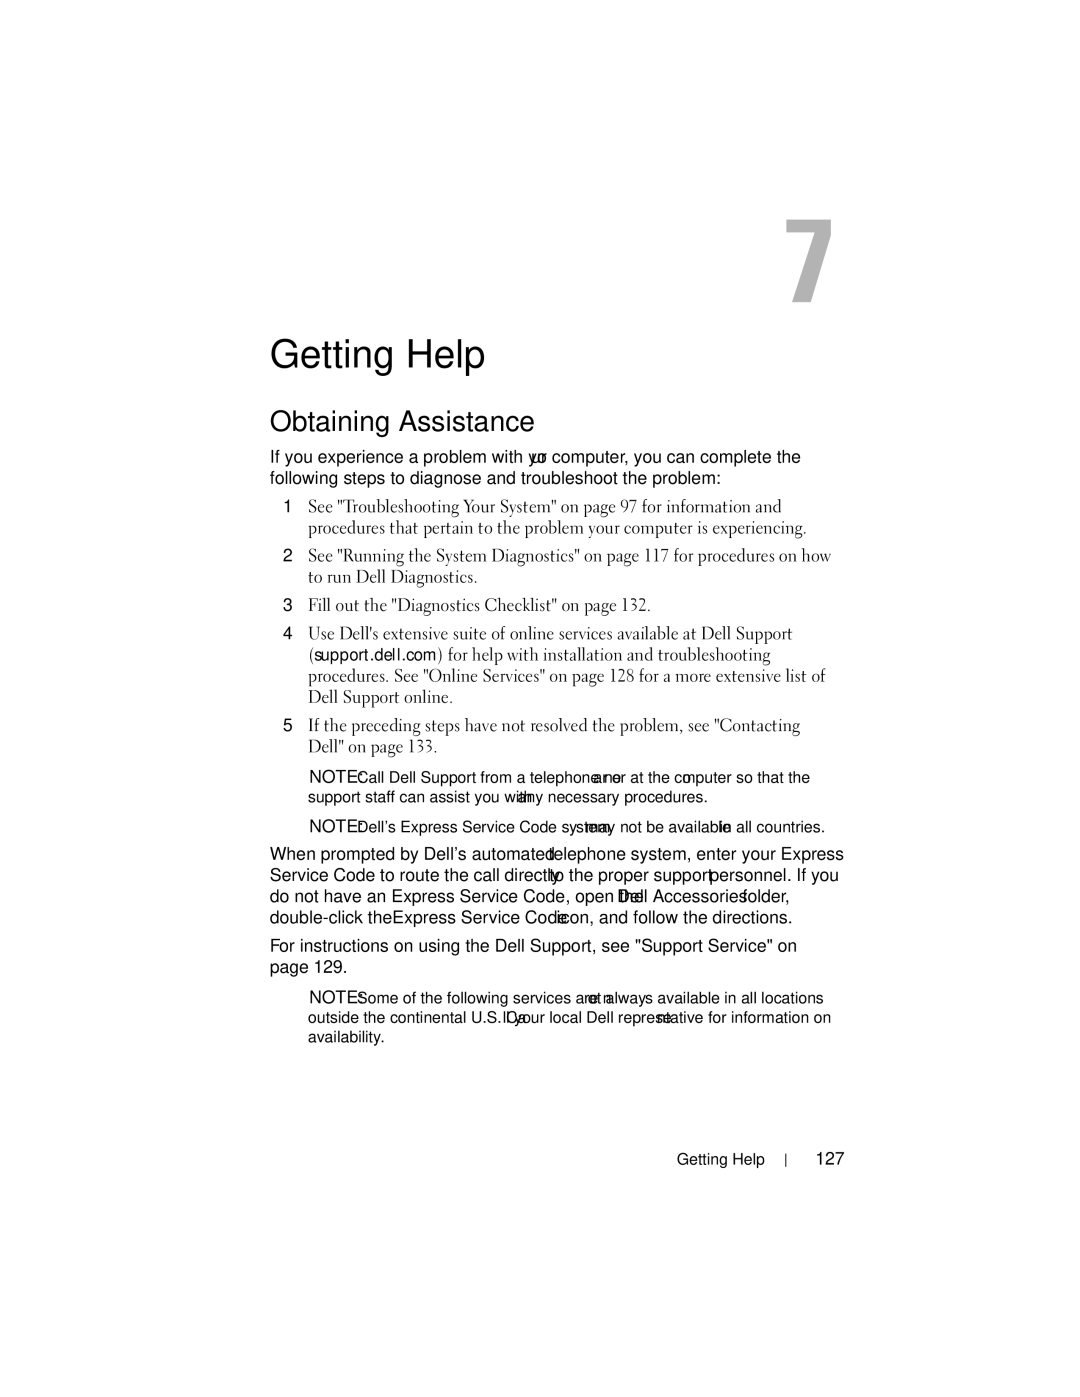 Dell NM176 owner manual Obtaining Assistance, 127, Getting Help 